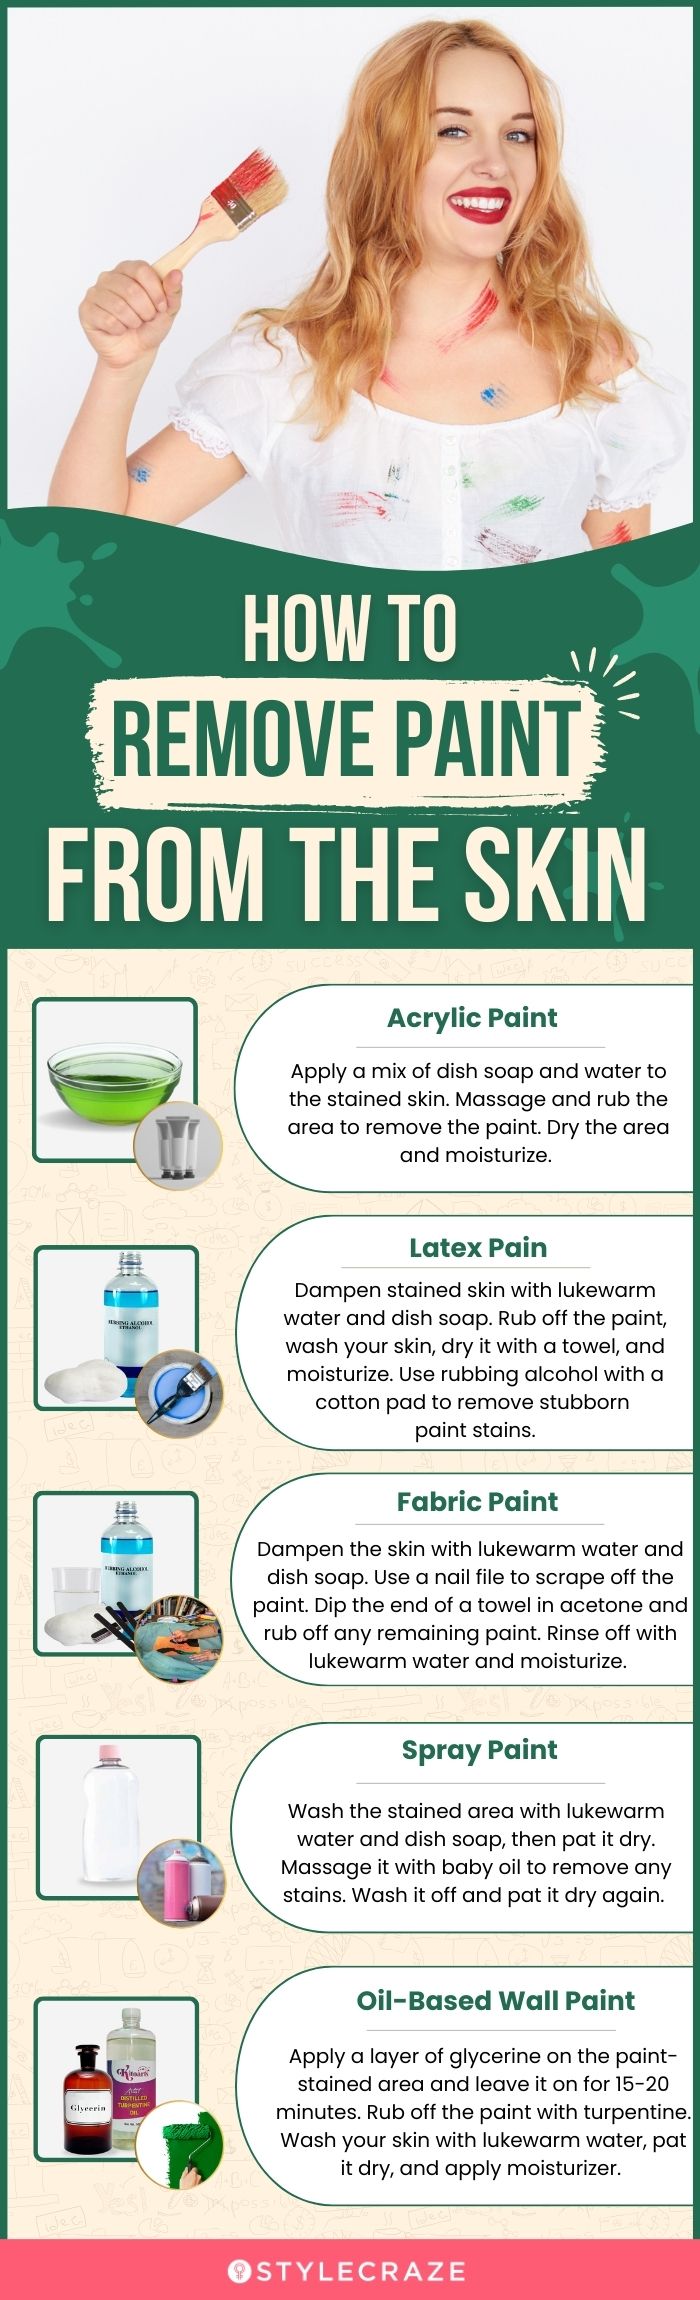 how to remove paint from the skin (infographic)